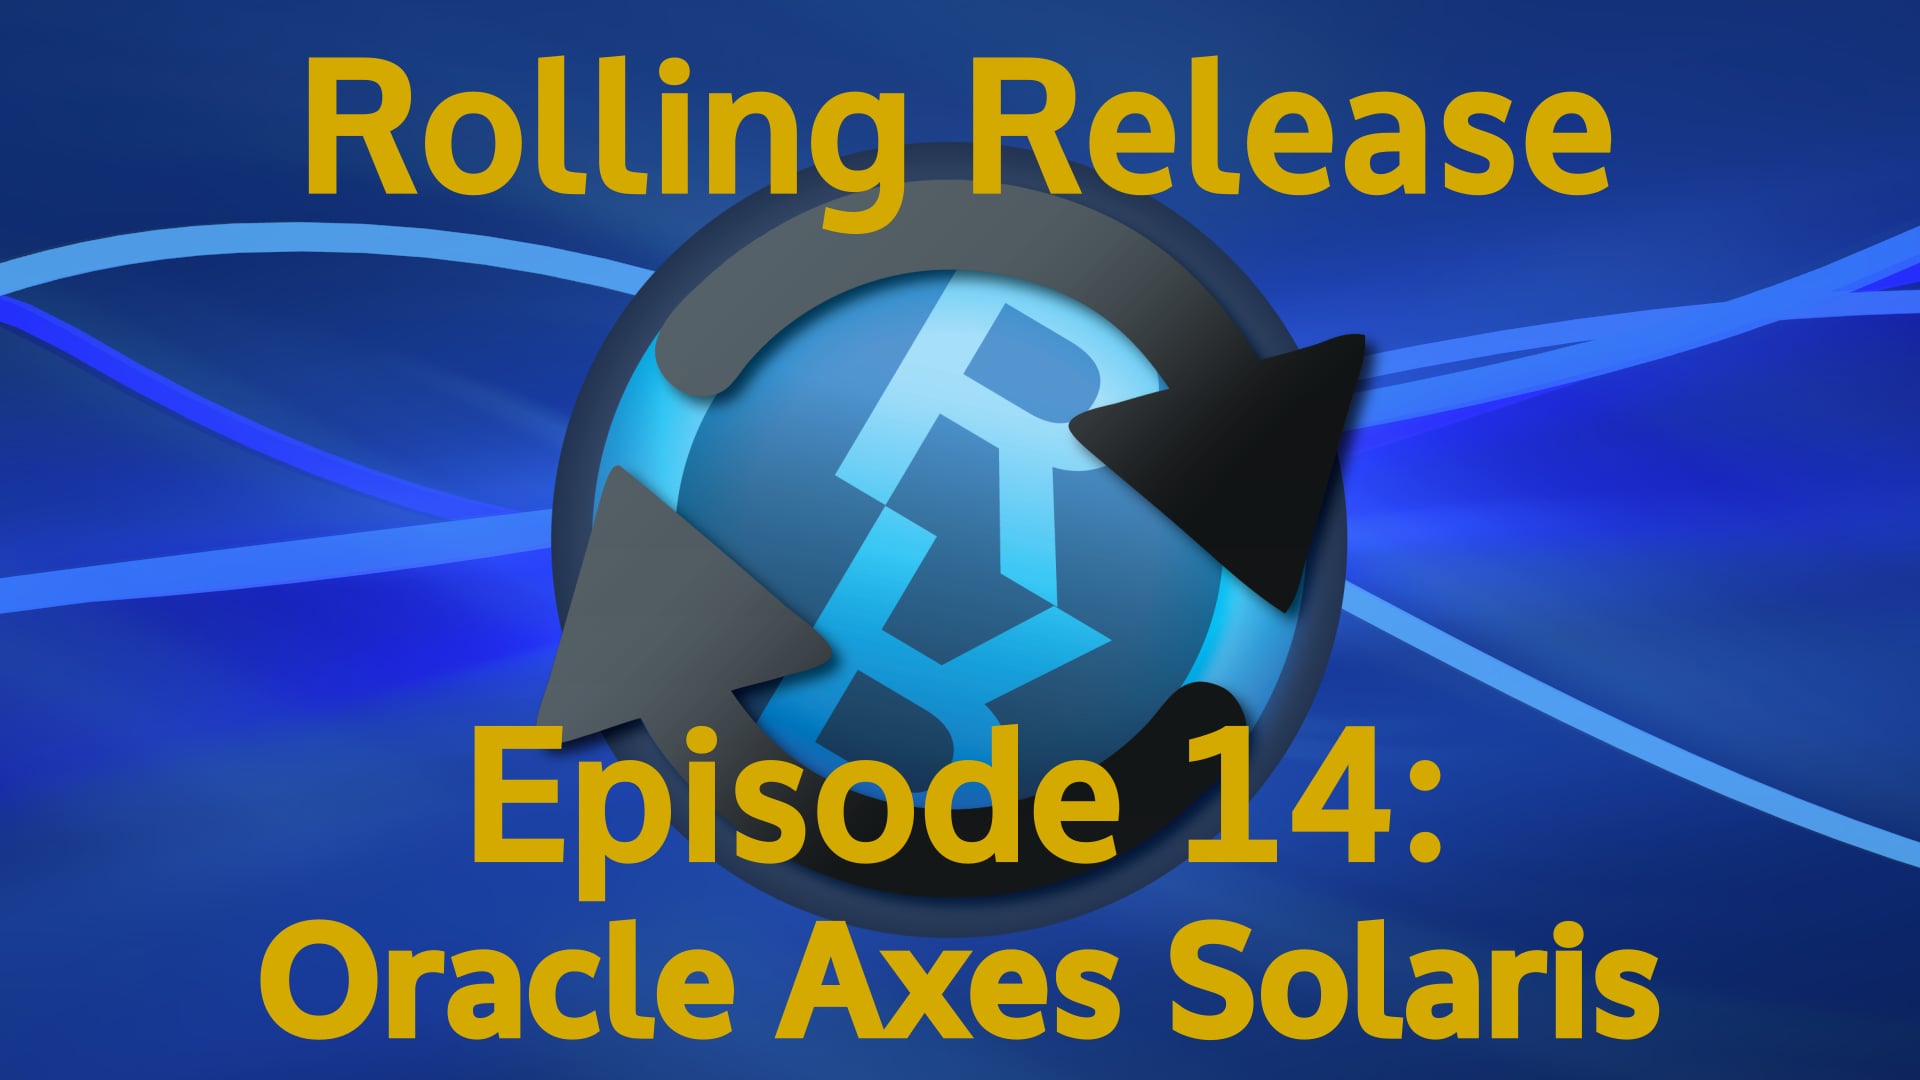 Oracle Axes Solaris - Rolling Release #14